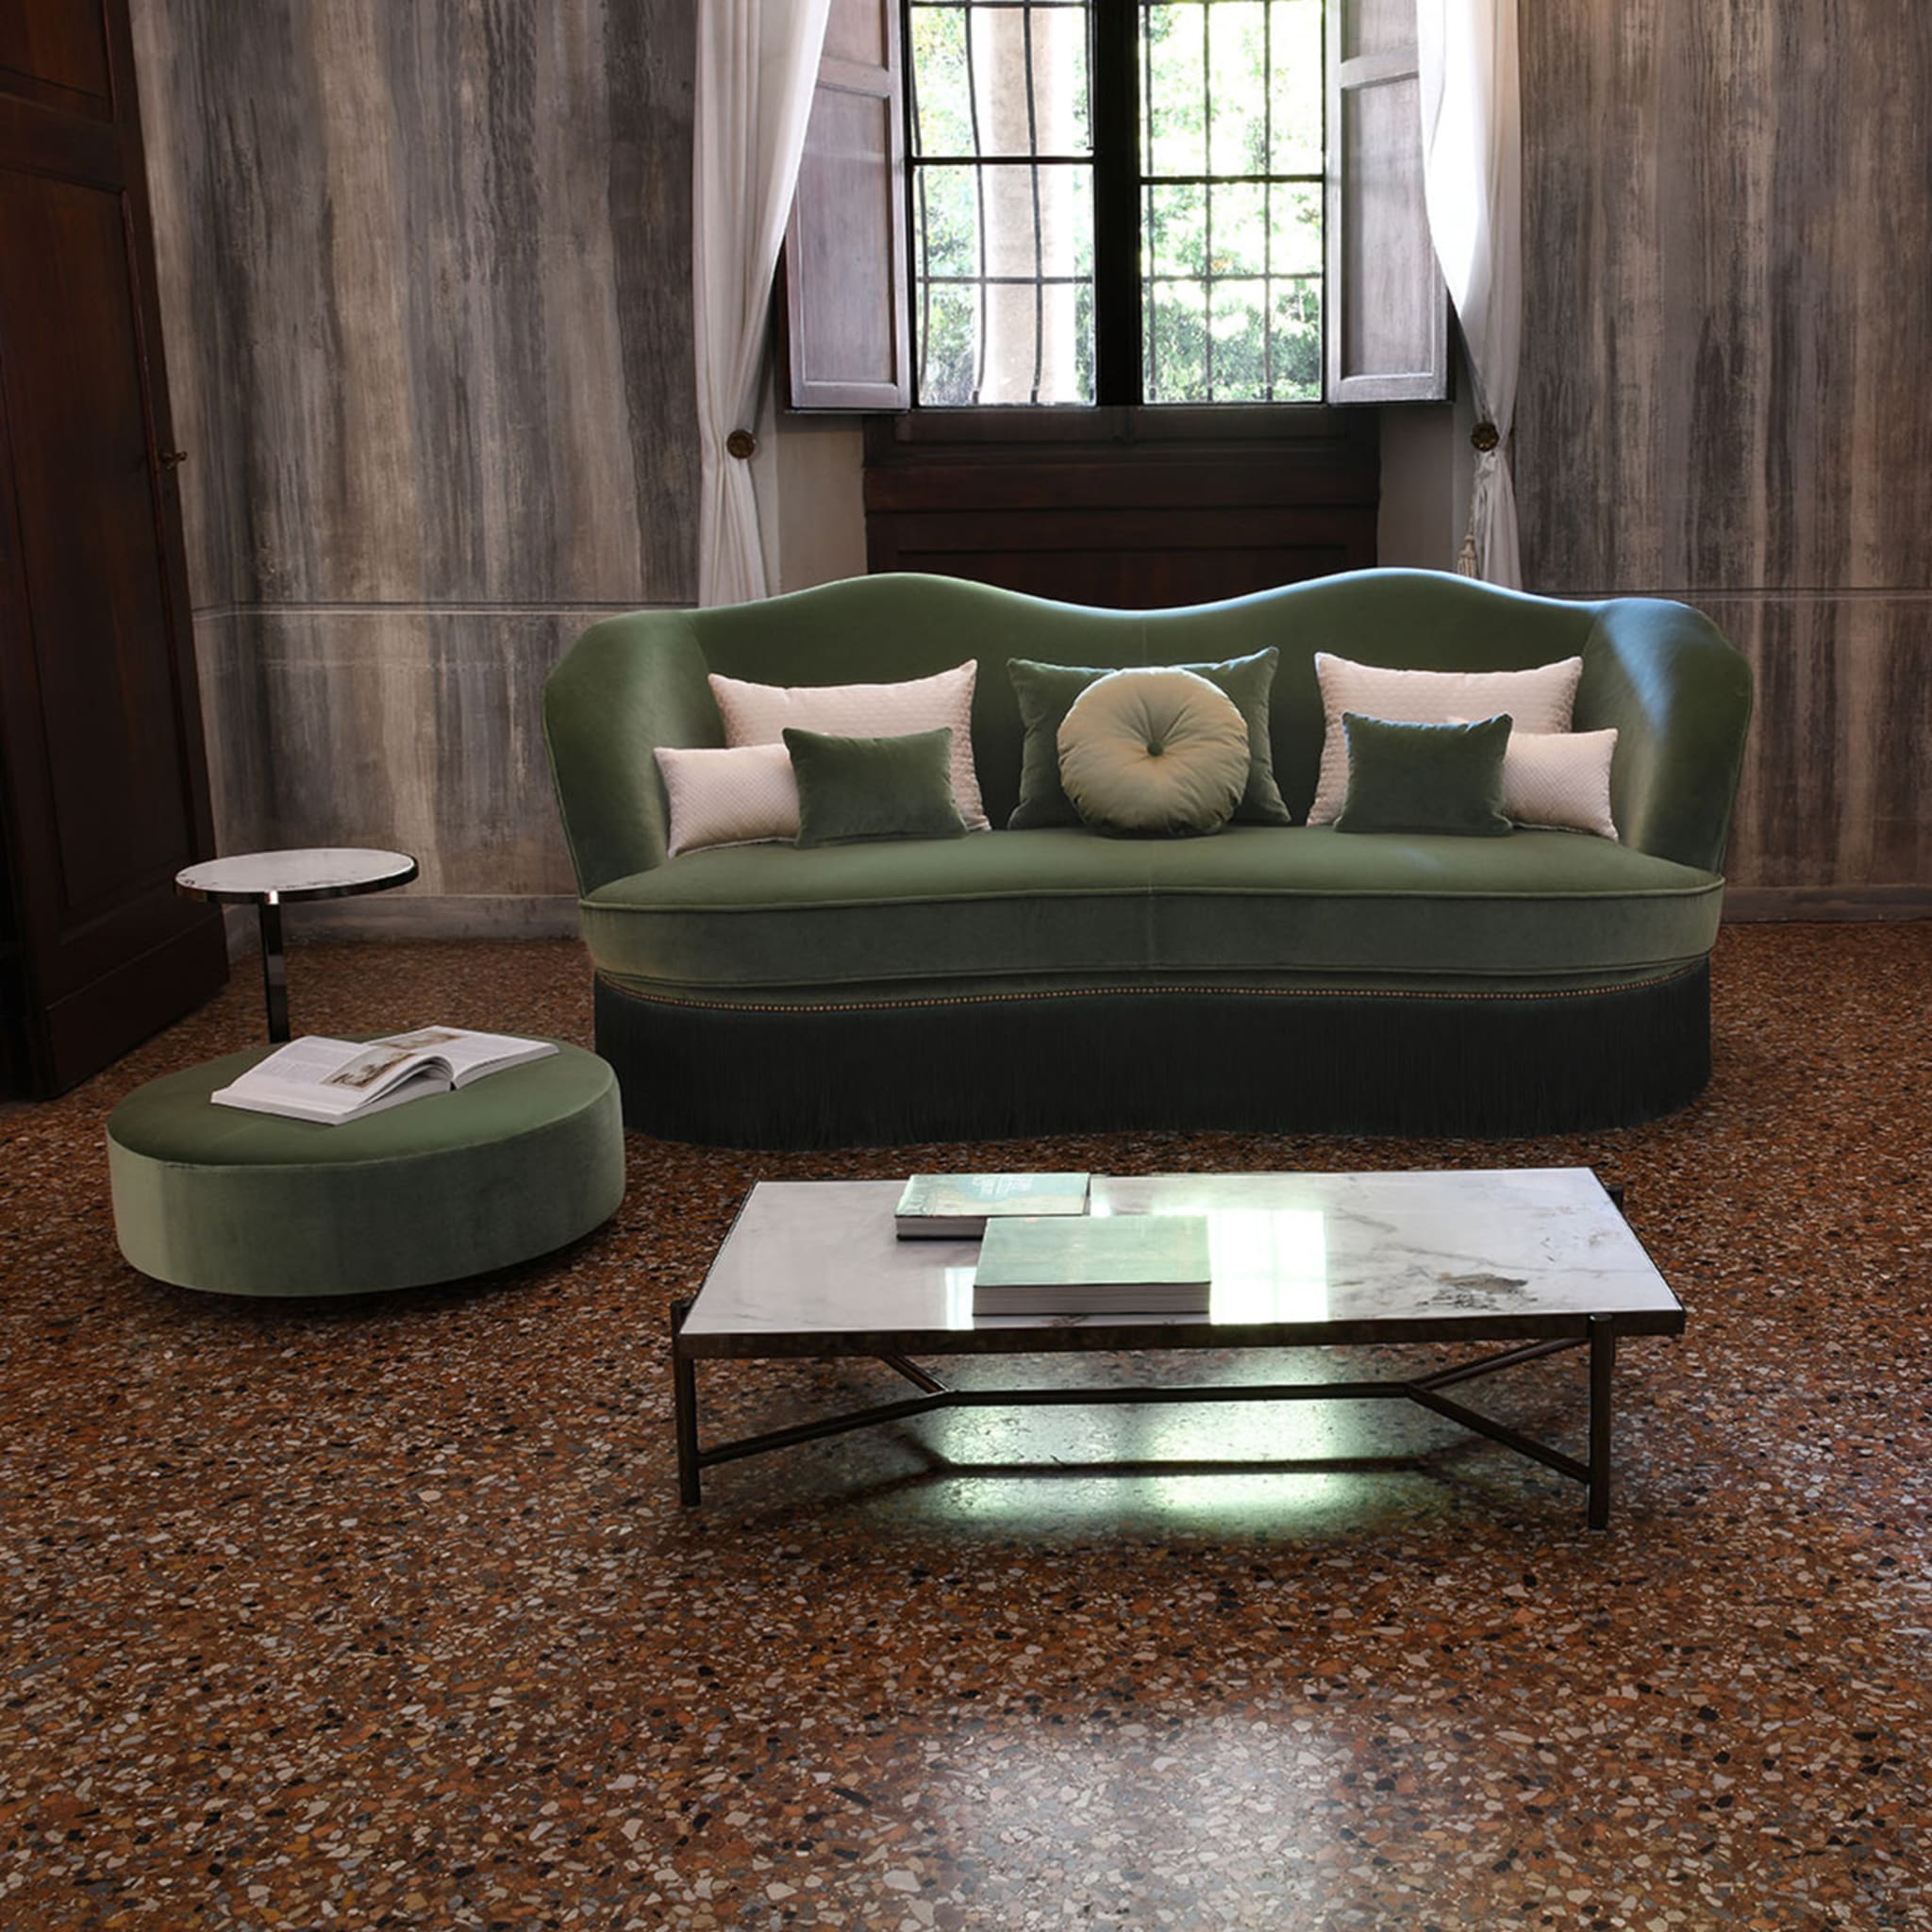 Febe Set of Green Pouf and Small Table - Alternative view 1